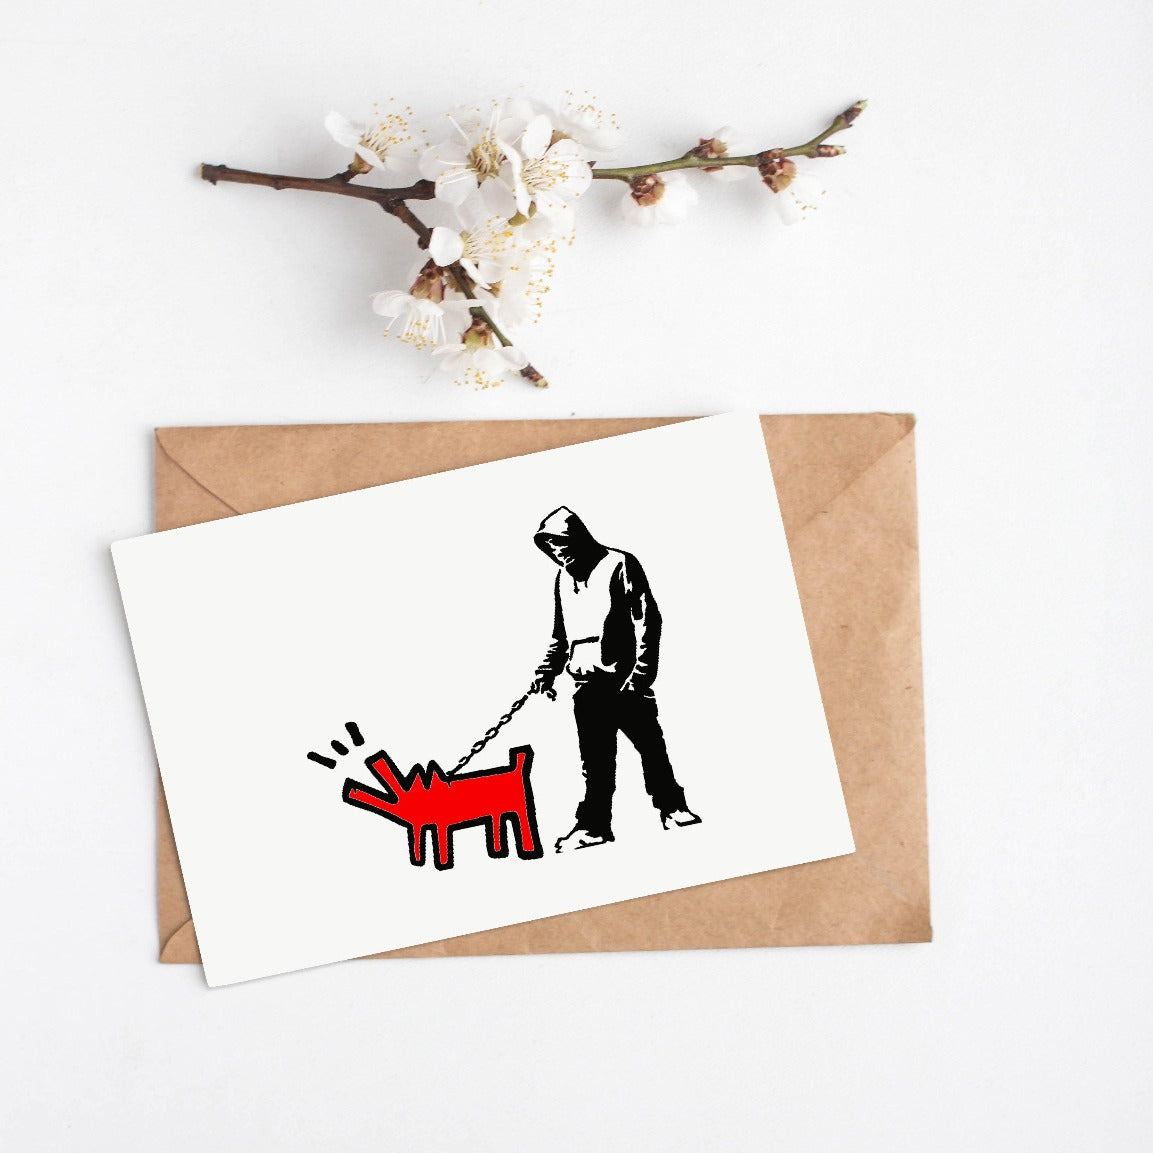 This vibrant Banksy print will add some edge to your décor. It features a man walking his dog, with the words "You complete me" in the background. The perfect way to show your love for your furry friend. - 98types